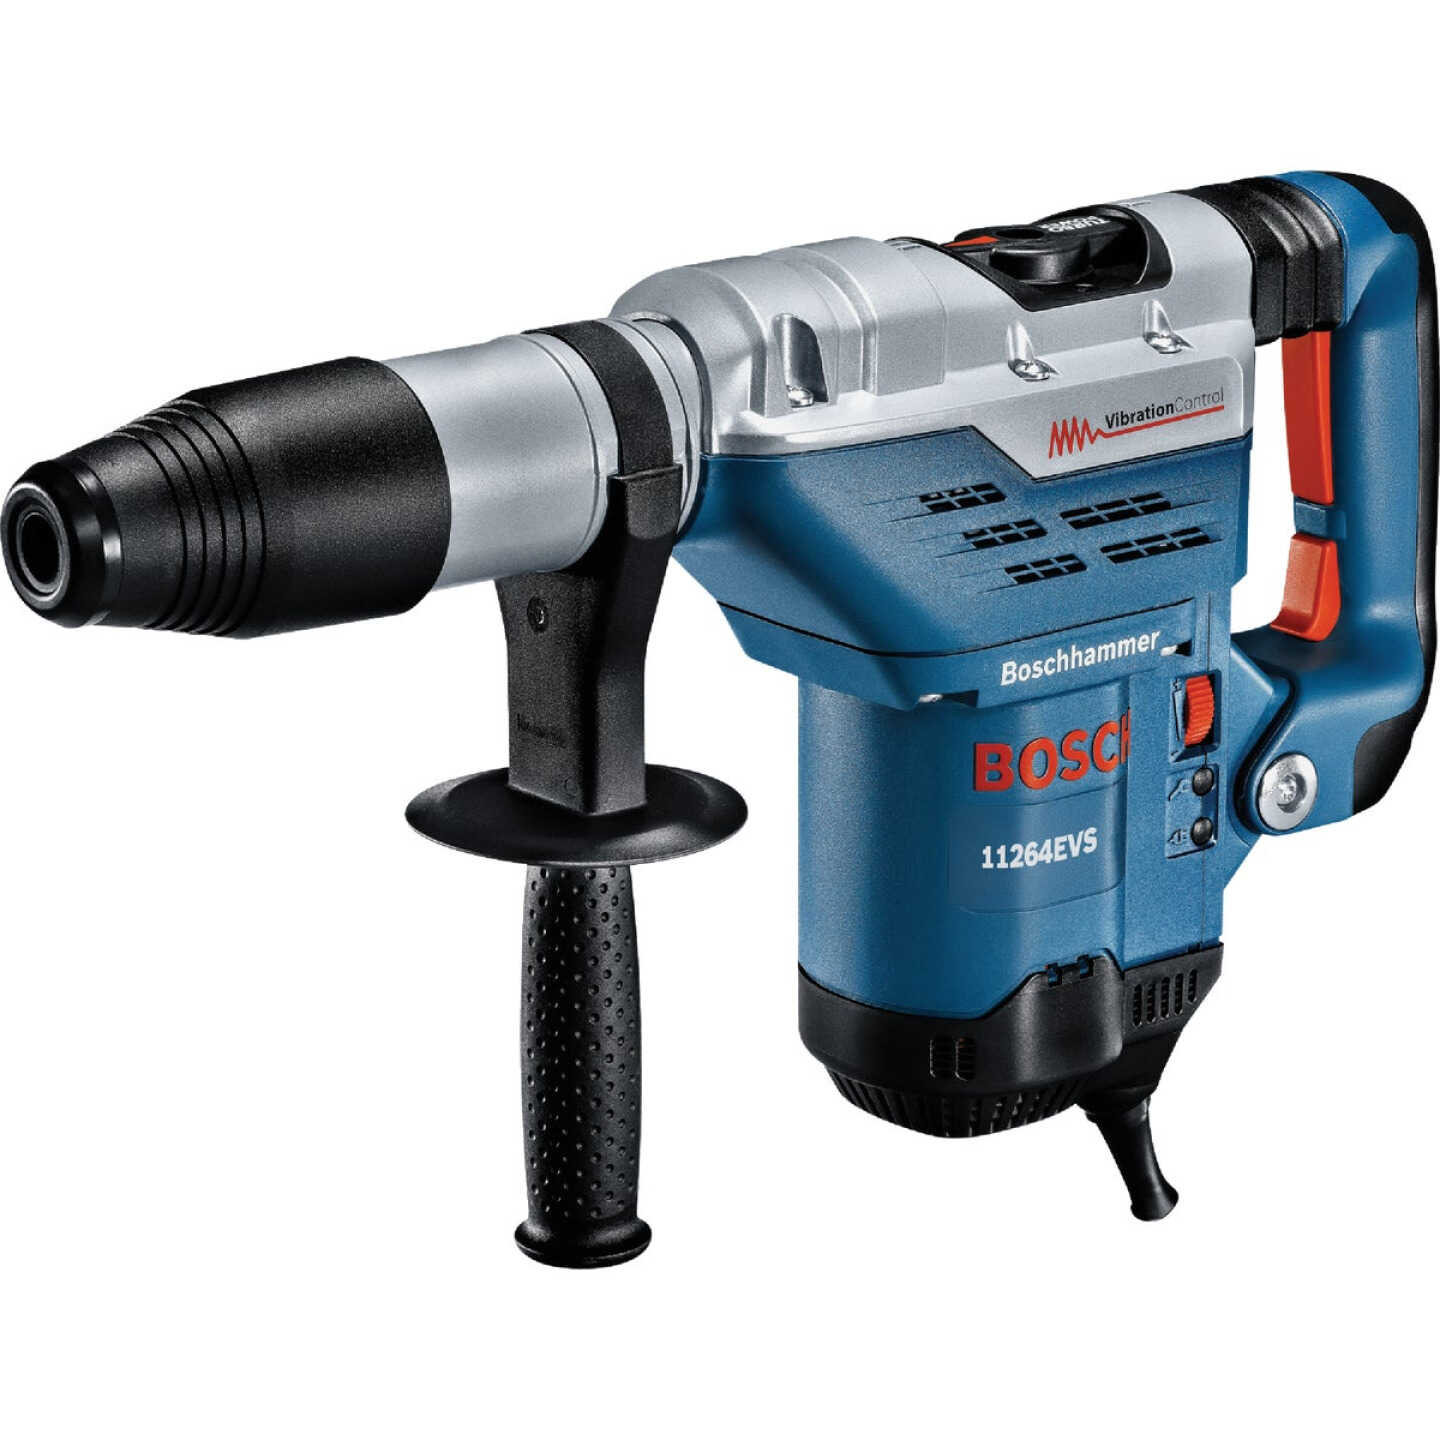 Townsend Company In. Drill Electric SDS-Max Bosch Hammer Rotary 1-5/8 Power - 3.0-Amp